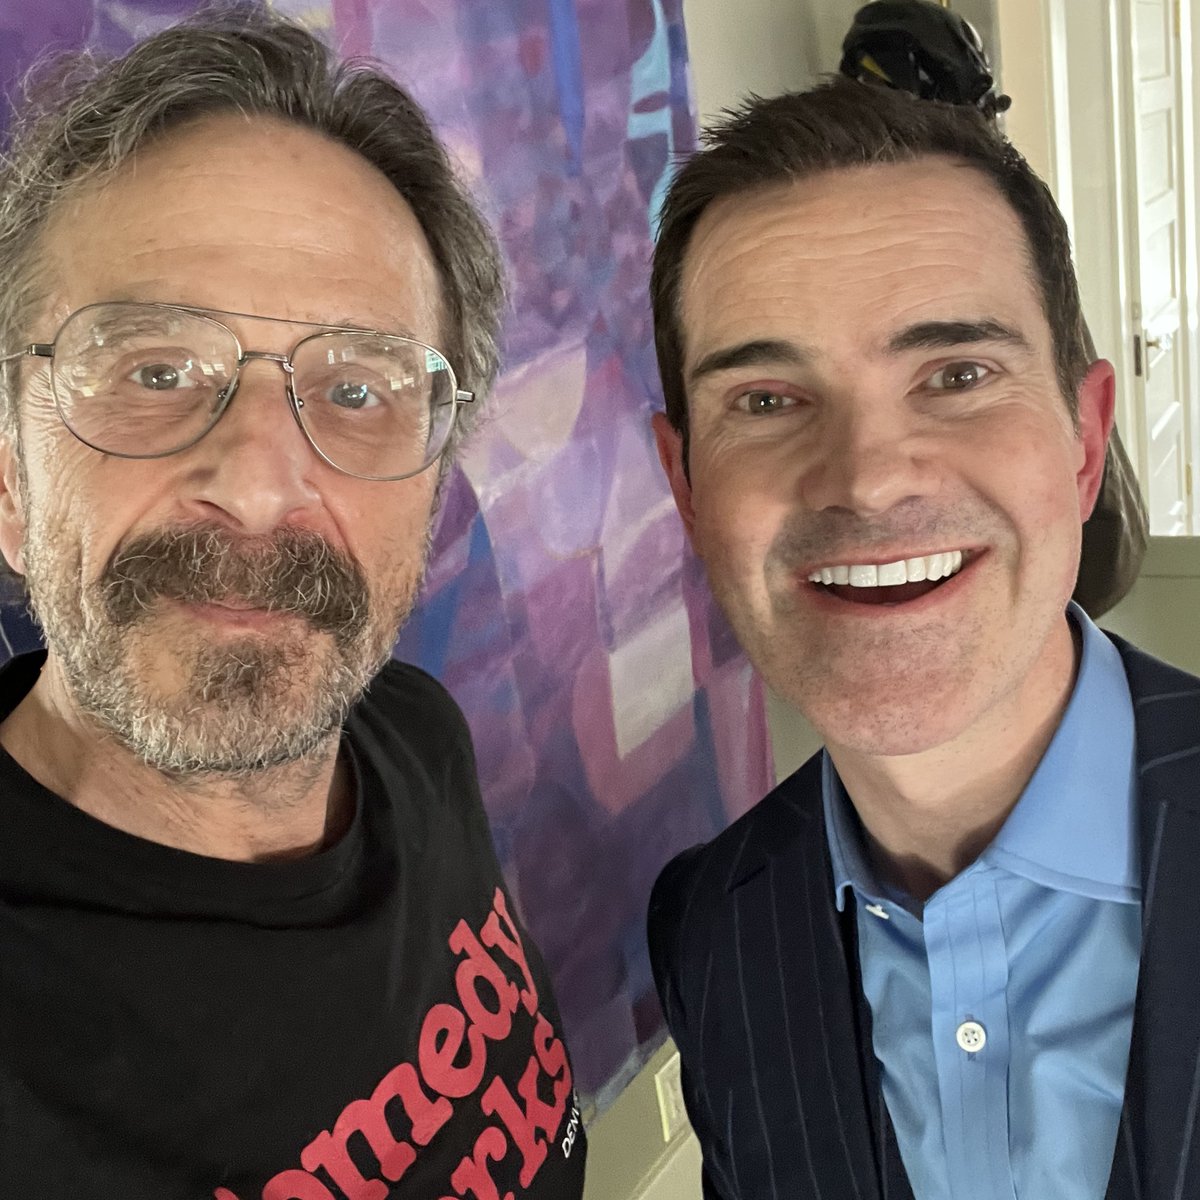 Jimmy Carr on the latest episode of WTF with Marc Maron! #BookedbyCTB #CentralTalentBooking #Podcast #Podcaster wtfpod.com/podcast/episod…